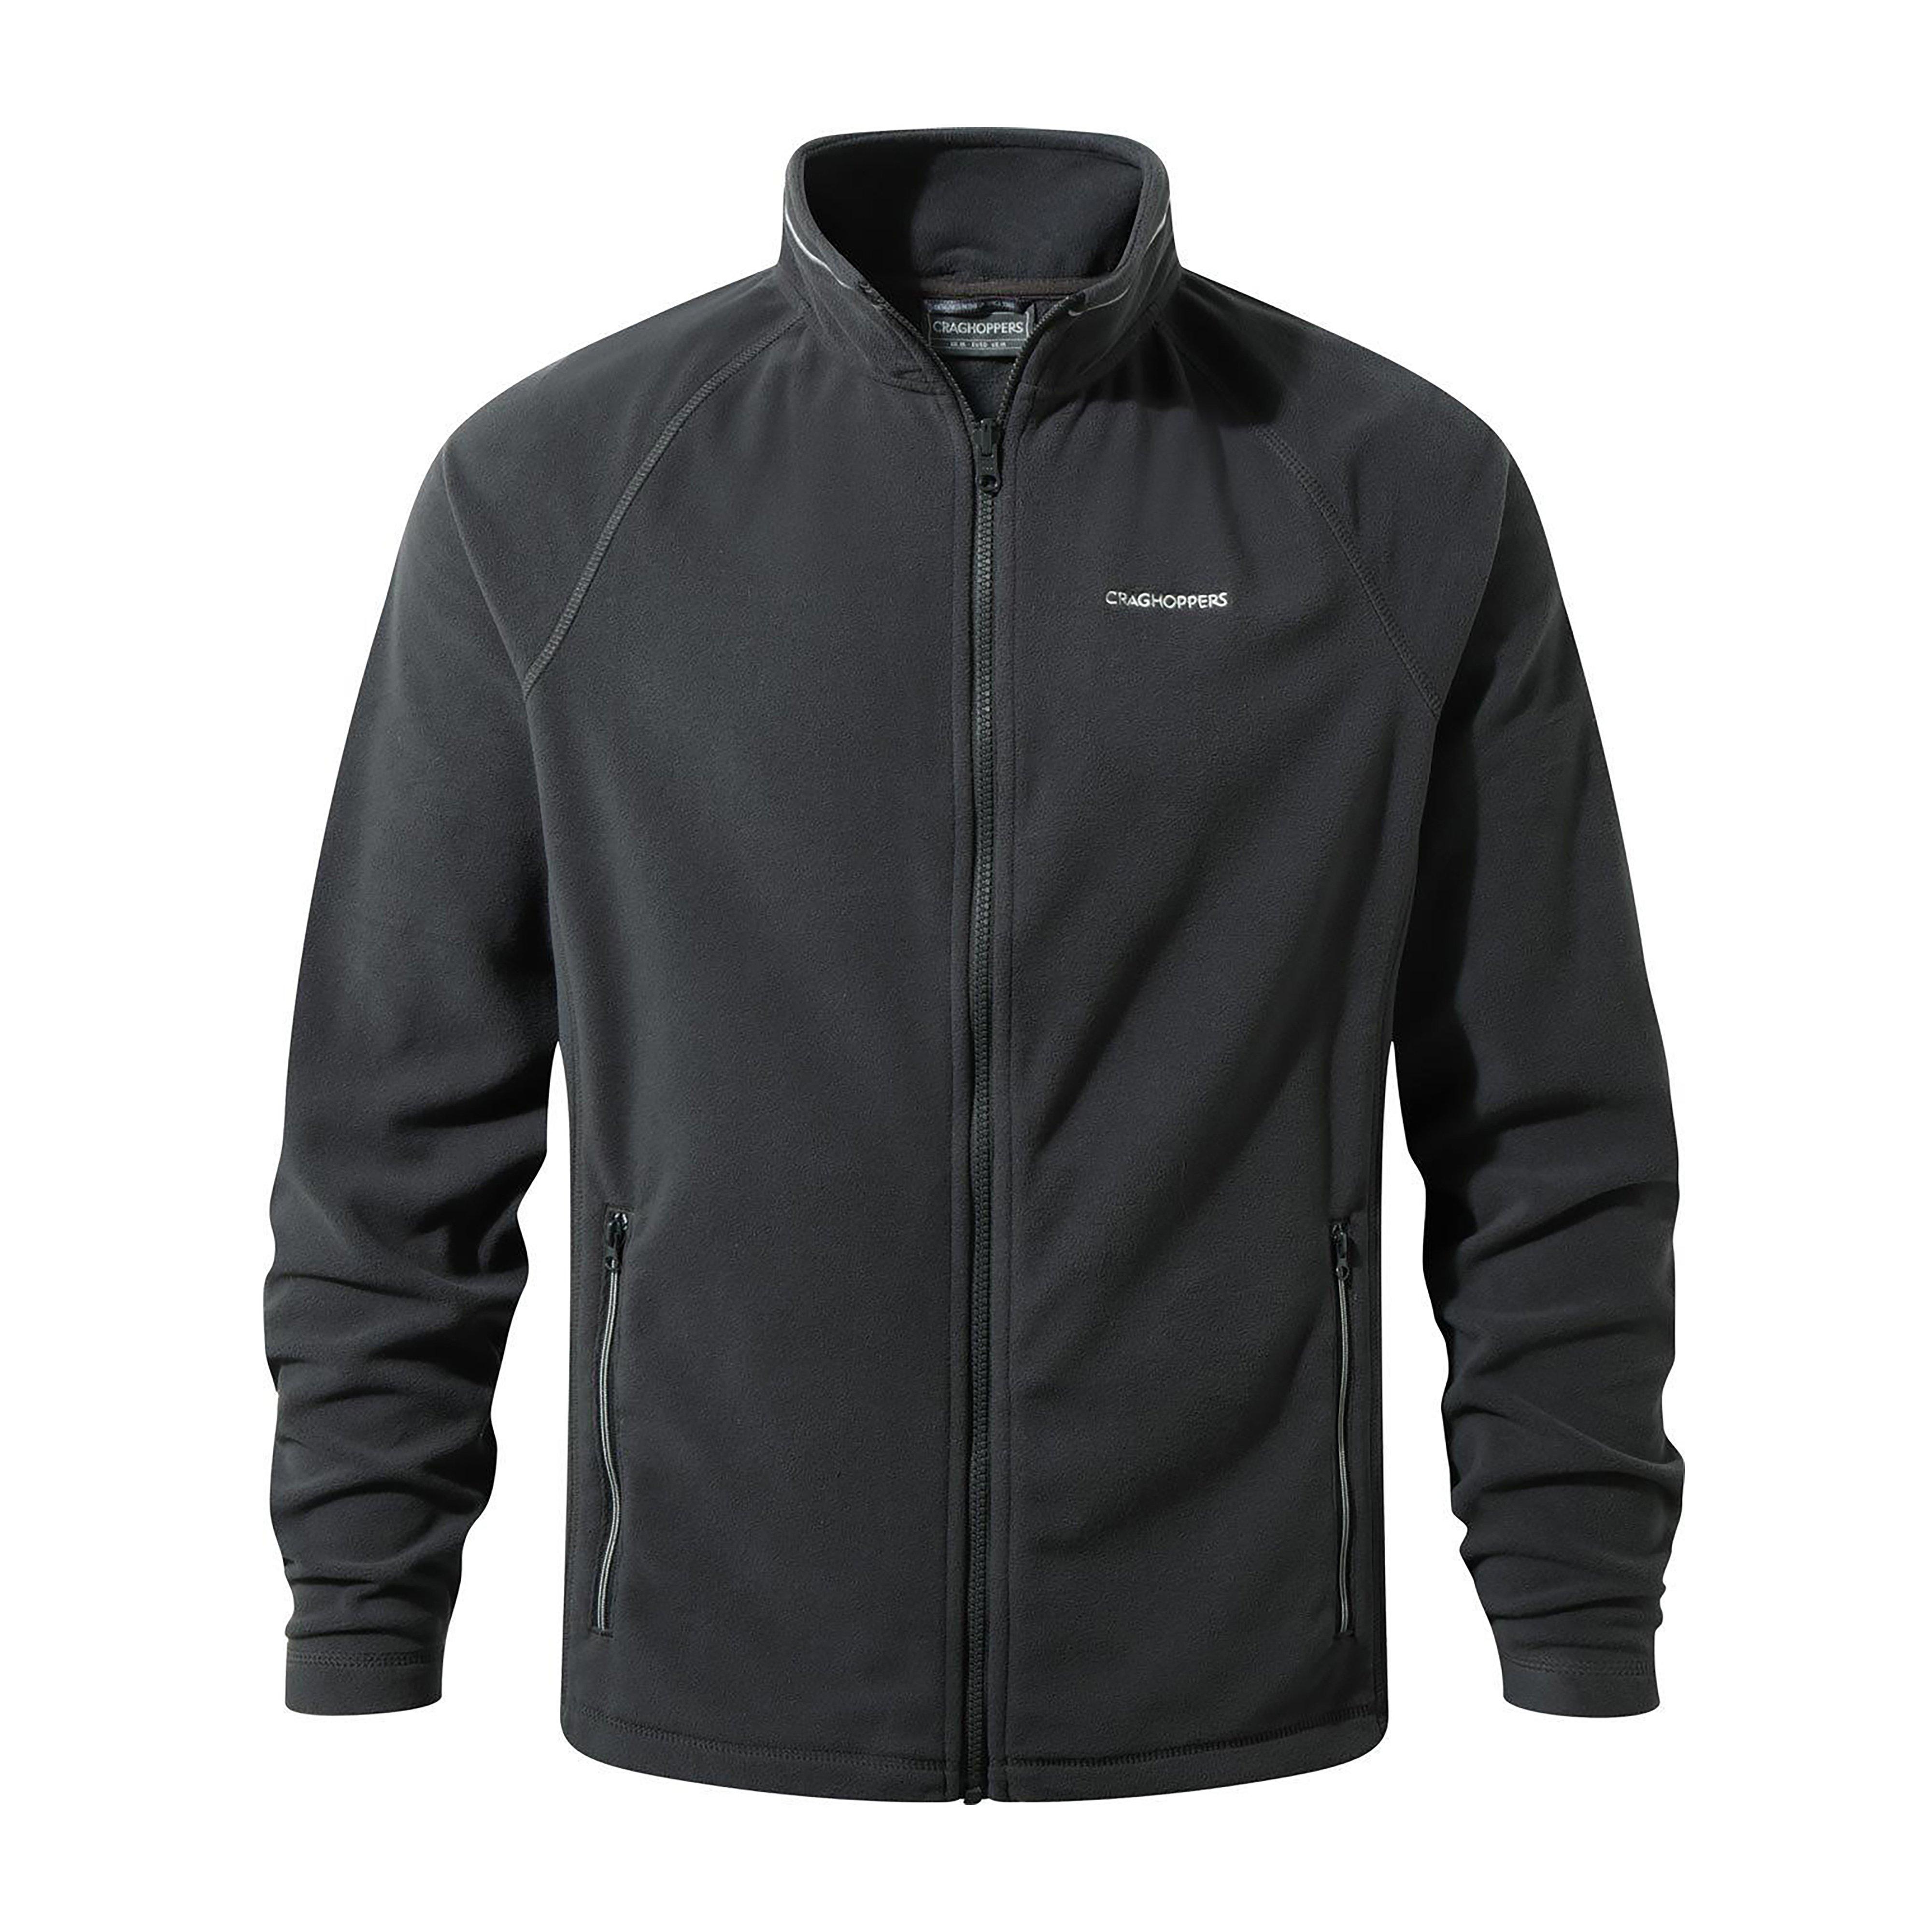 Craghoppers Men's Selby Interactive Jacket Review